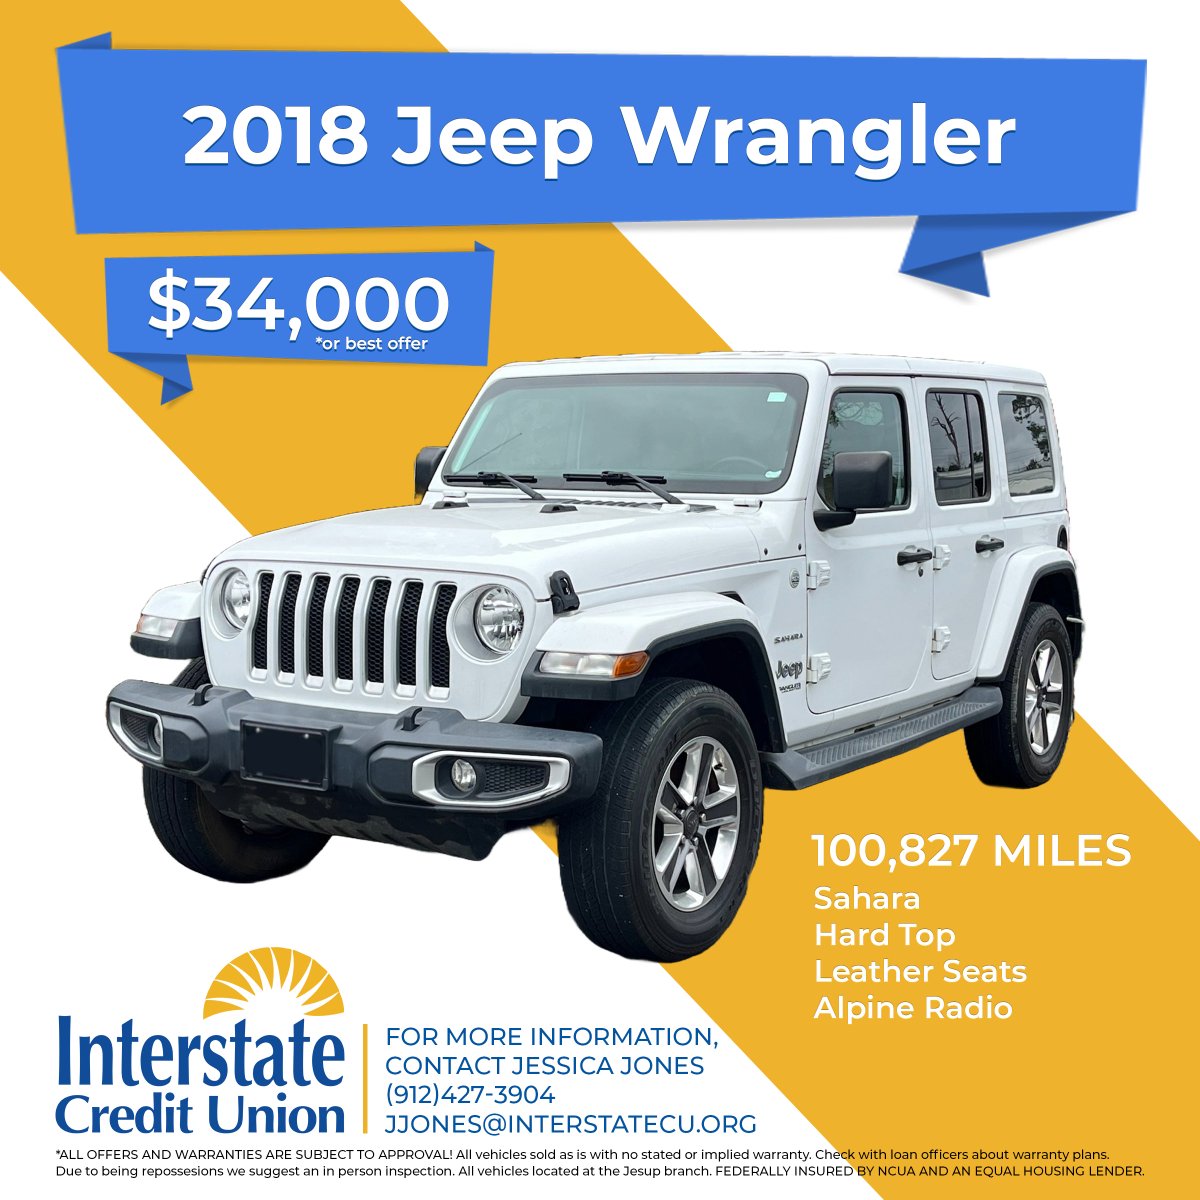 Learn the “Jeep Wave” in this 2018 Jeep Wrangler we’ve got for sale! For more information, contact Jessica Jones (912)427-3904.

To view more repos for sale, visit our website: bit.ly/43scMLN 

#InterstateCreditUnion #InterstateCU #BetterBanking